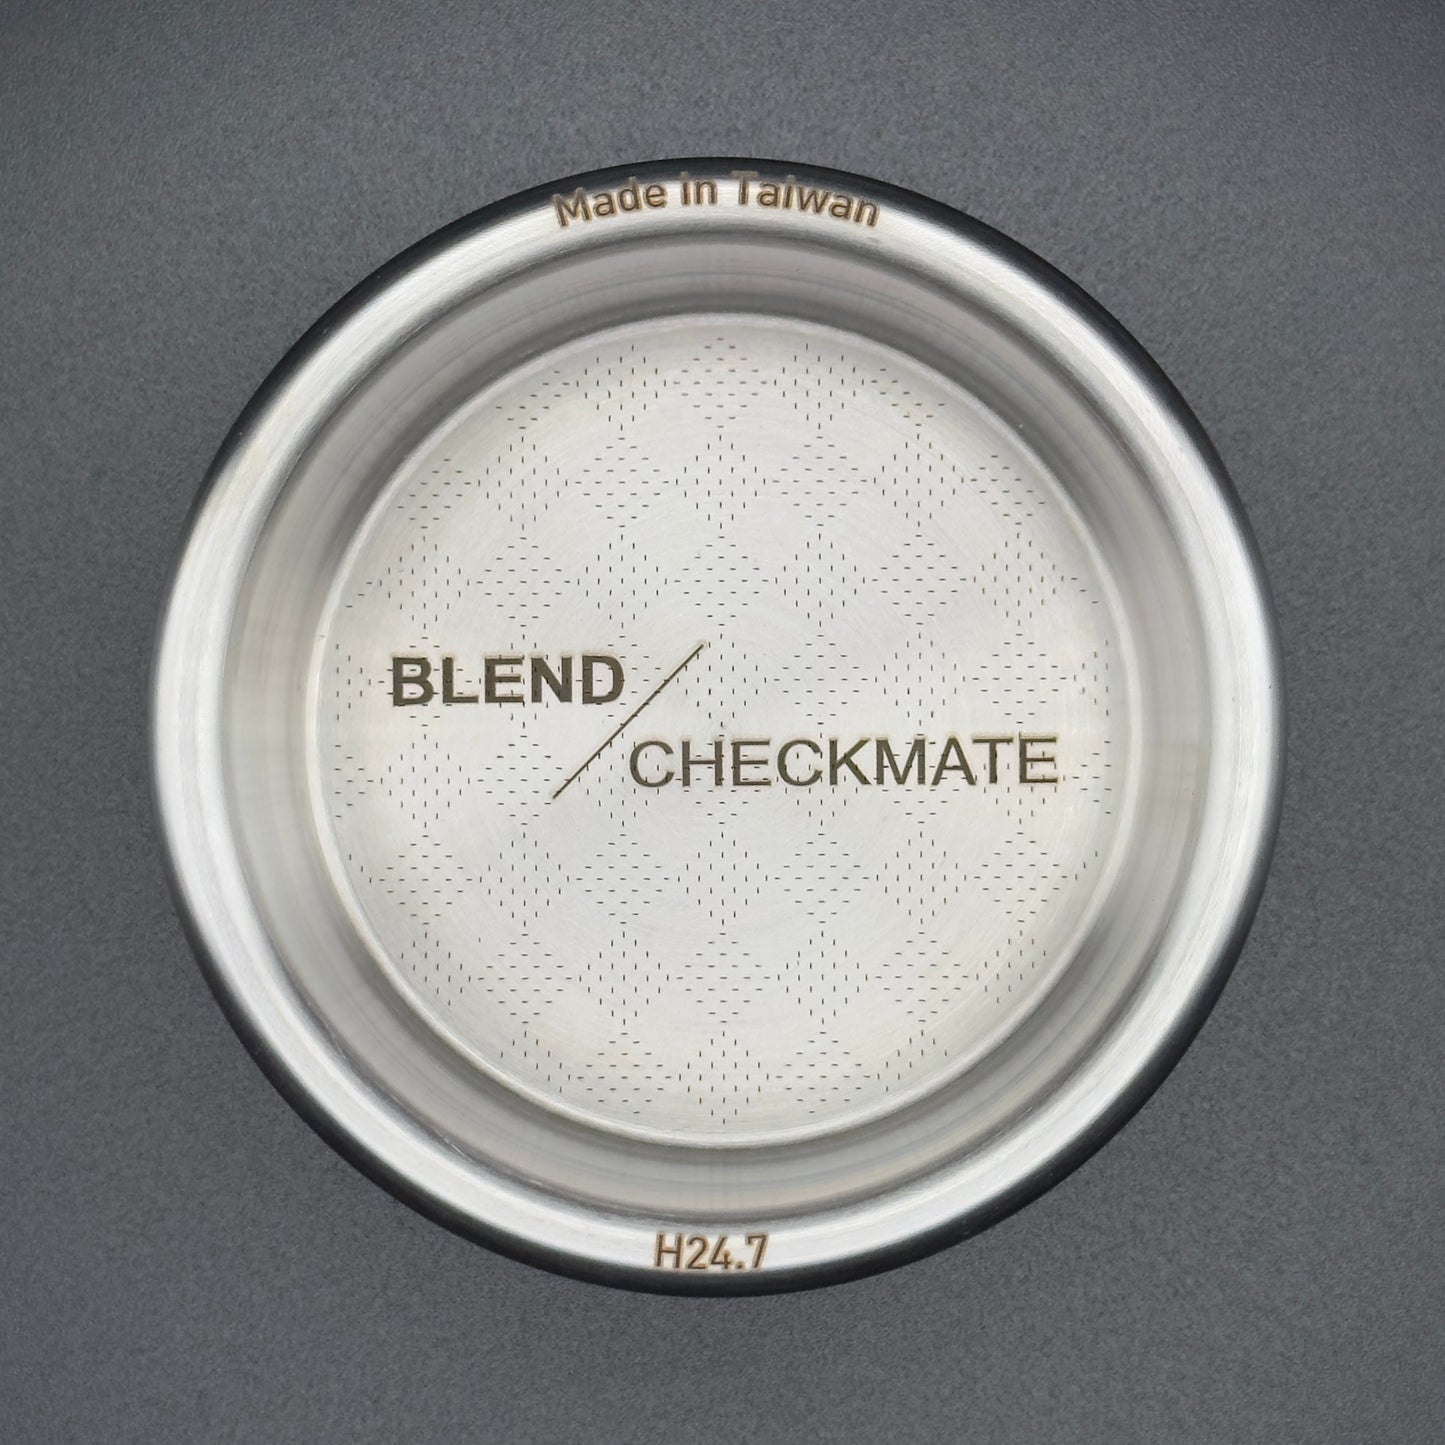 BLEND/CHECKMATE_H24.7/18g